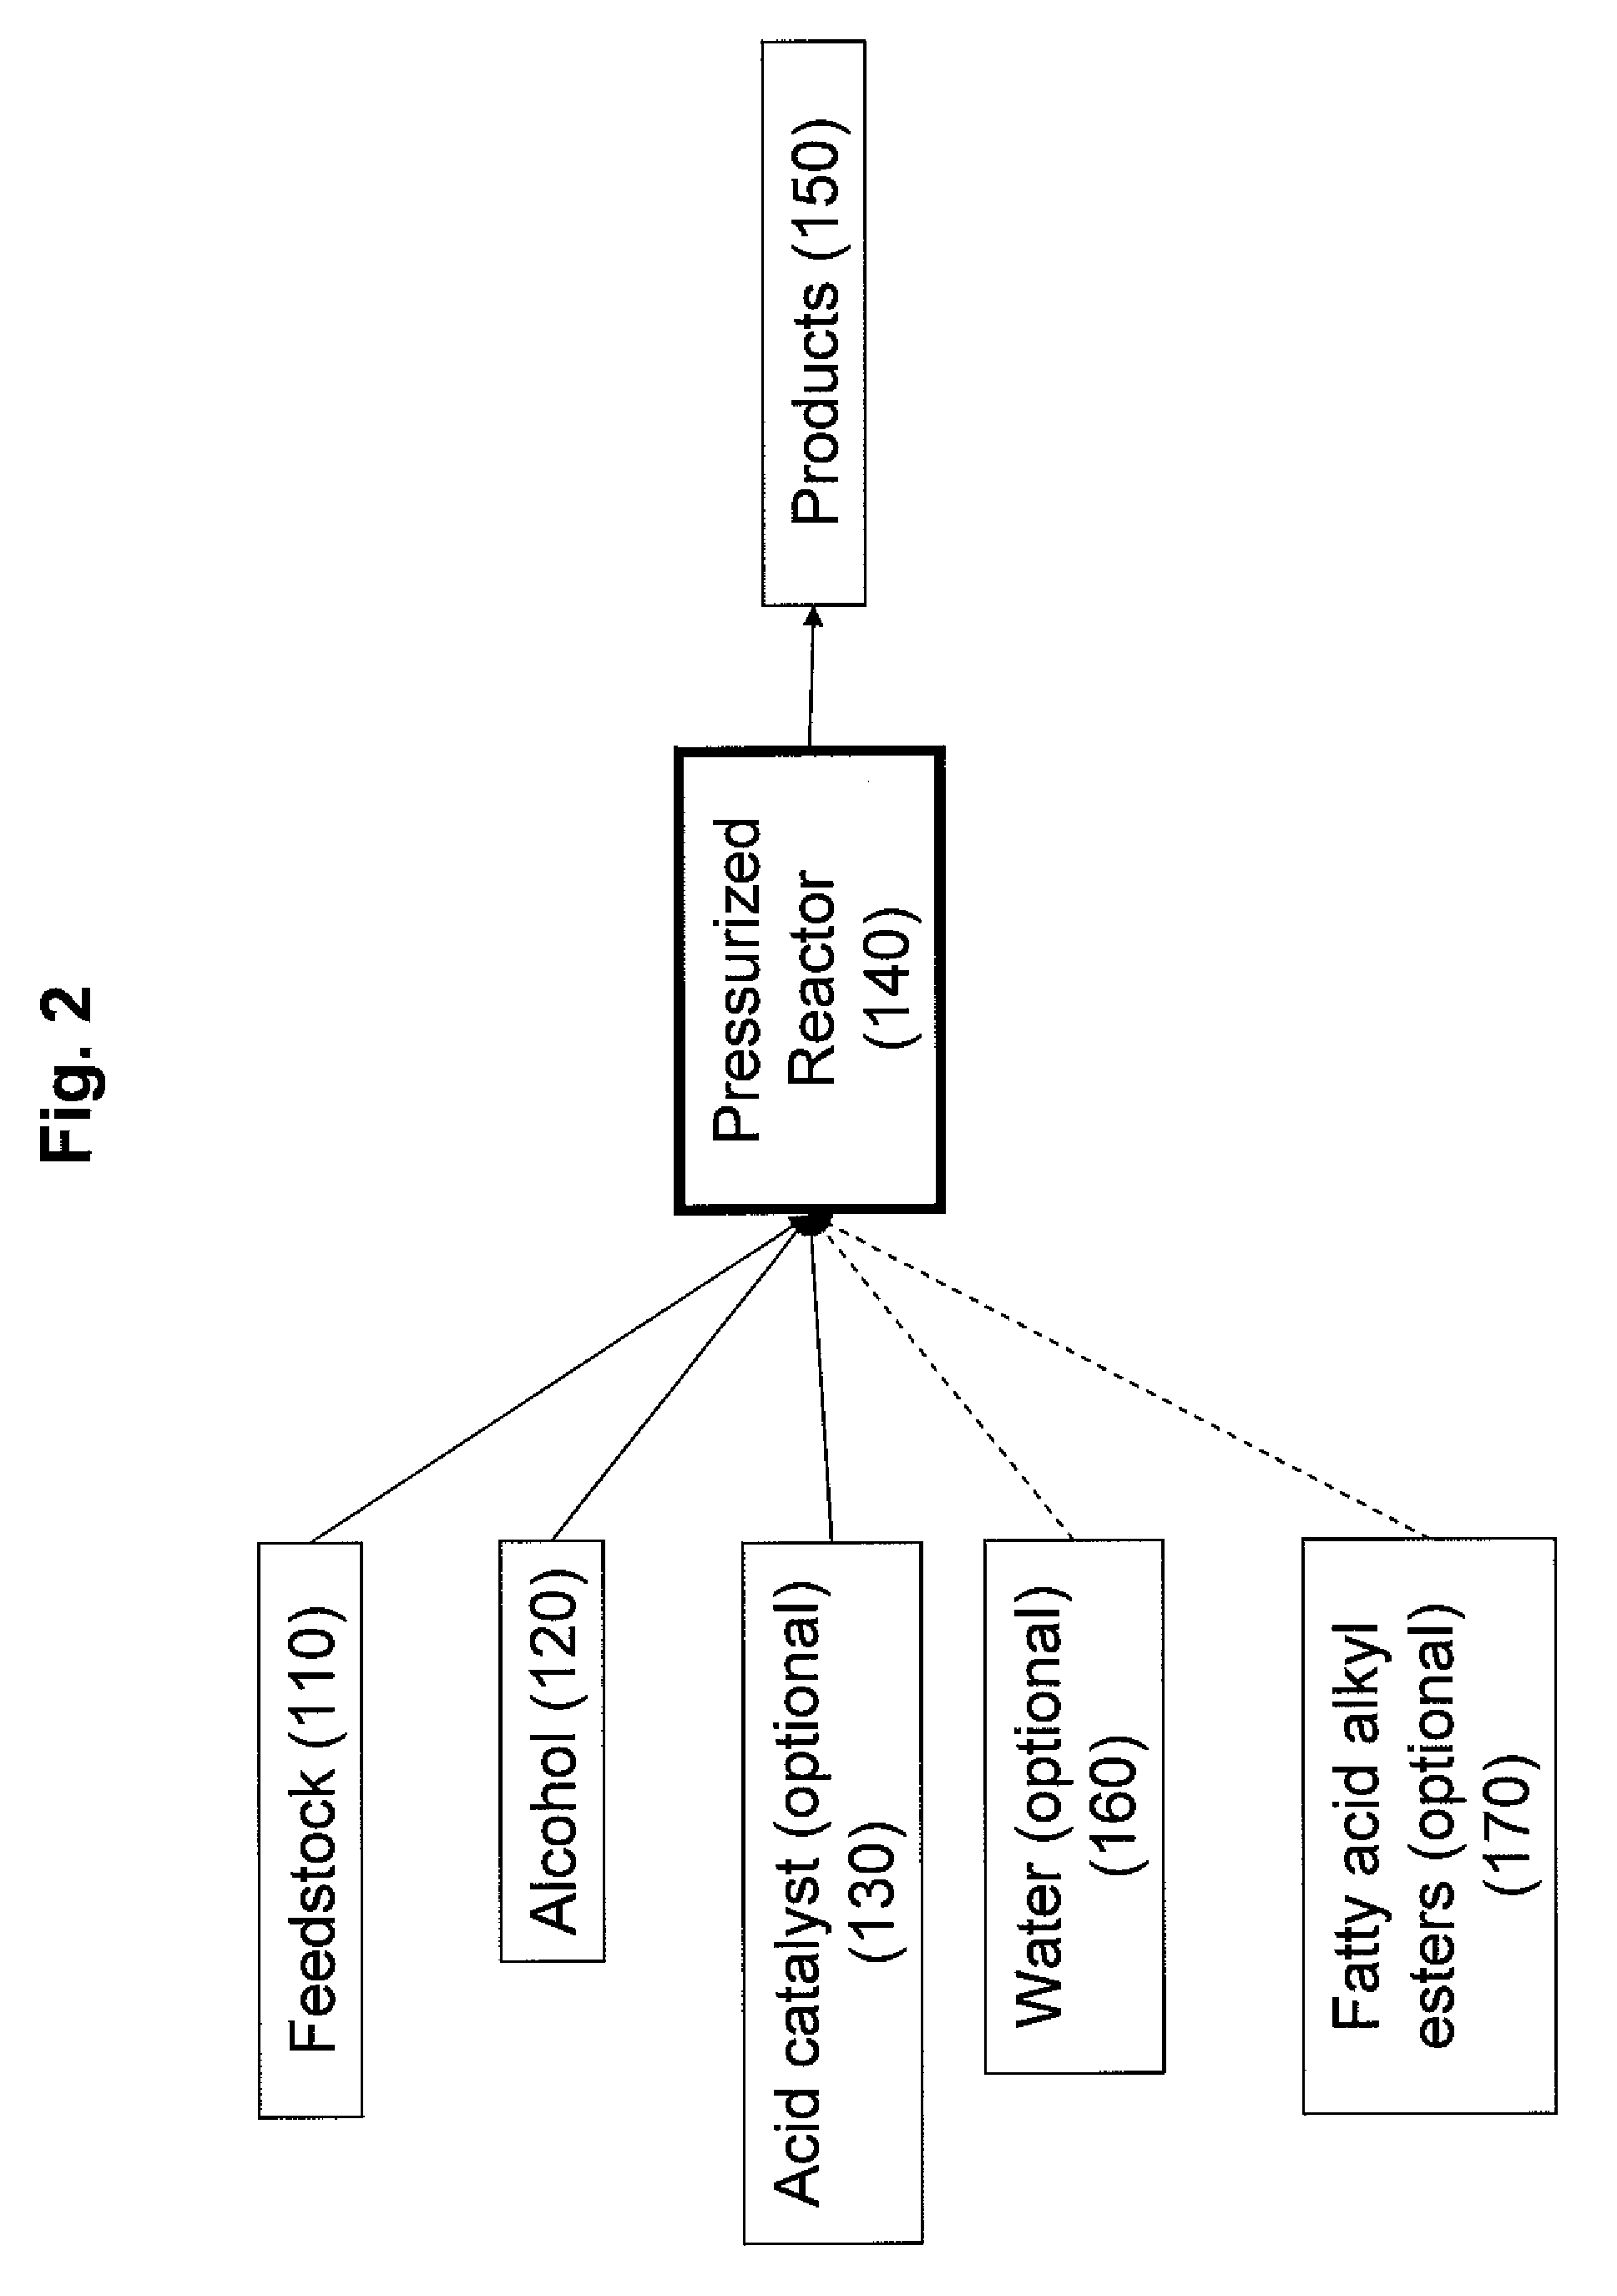 Method for conversion of oil-containing algae to 1,3-propanediol